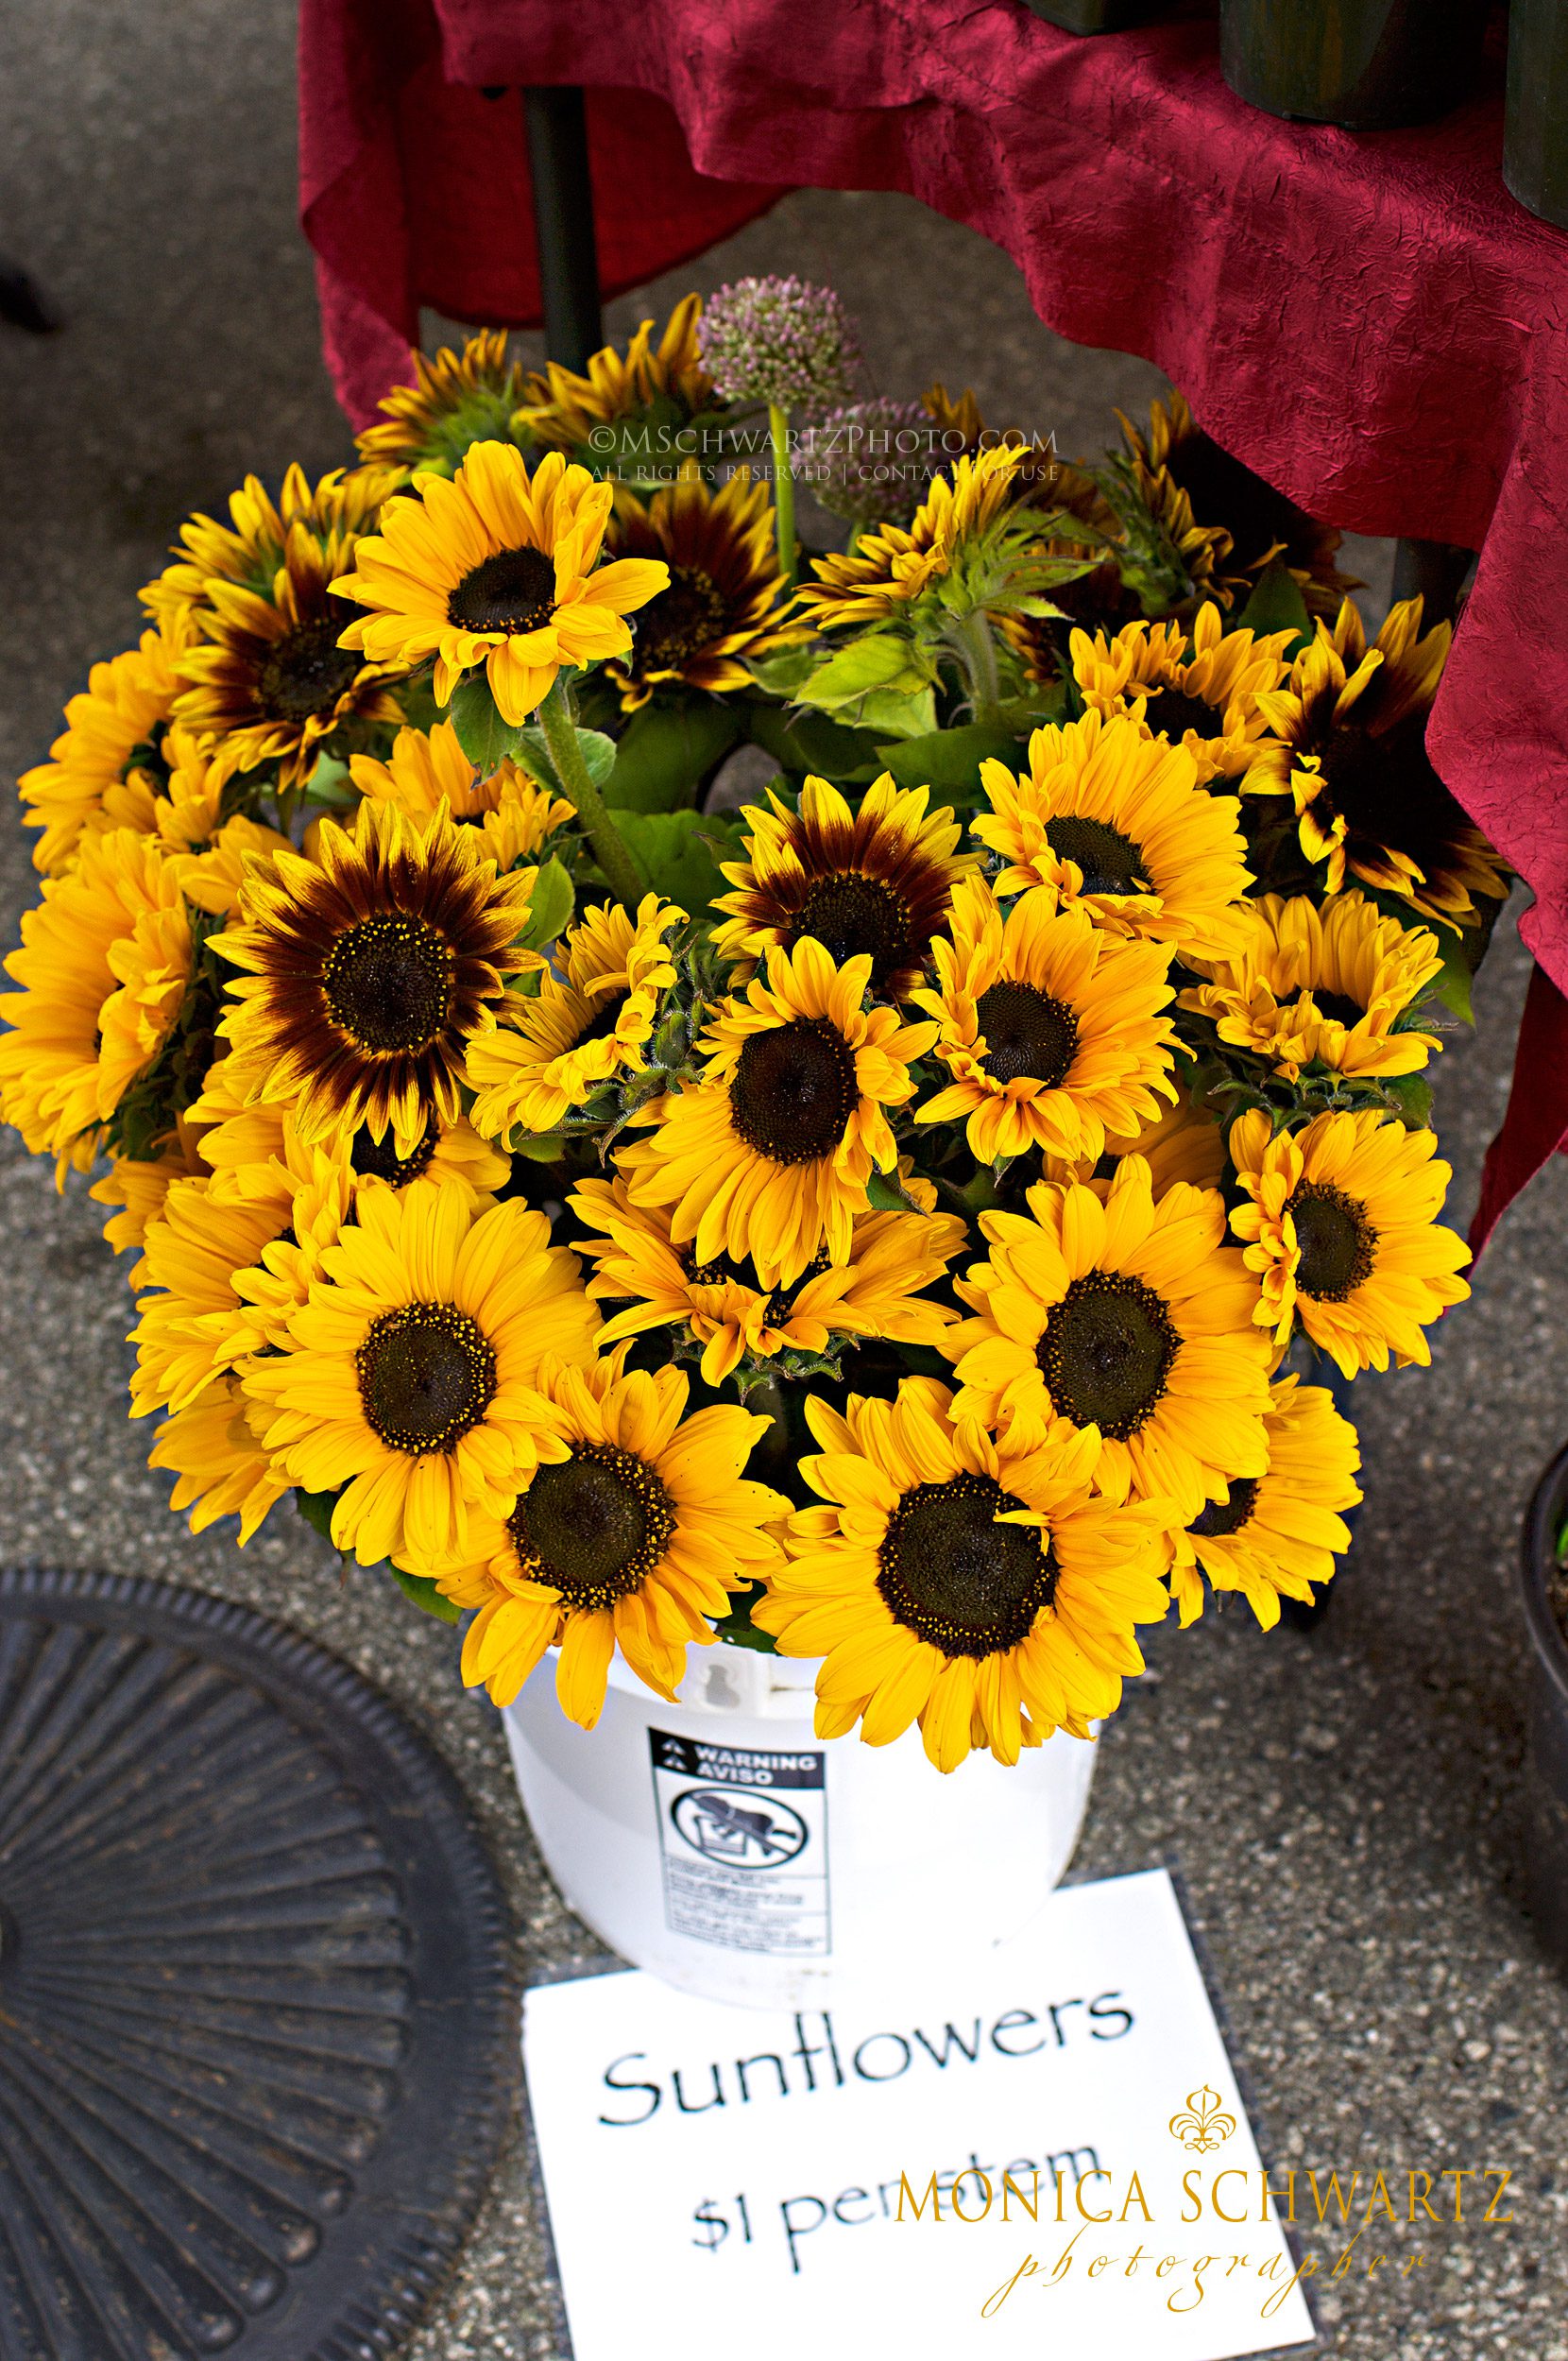 Sunflowers-at-the-farmers-market-in-Carmel-by-the-Sea-California